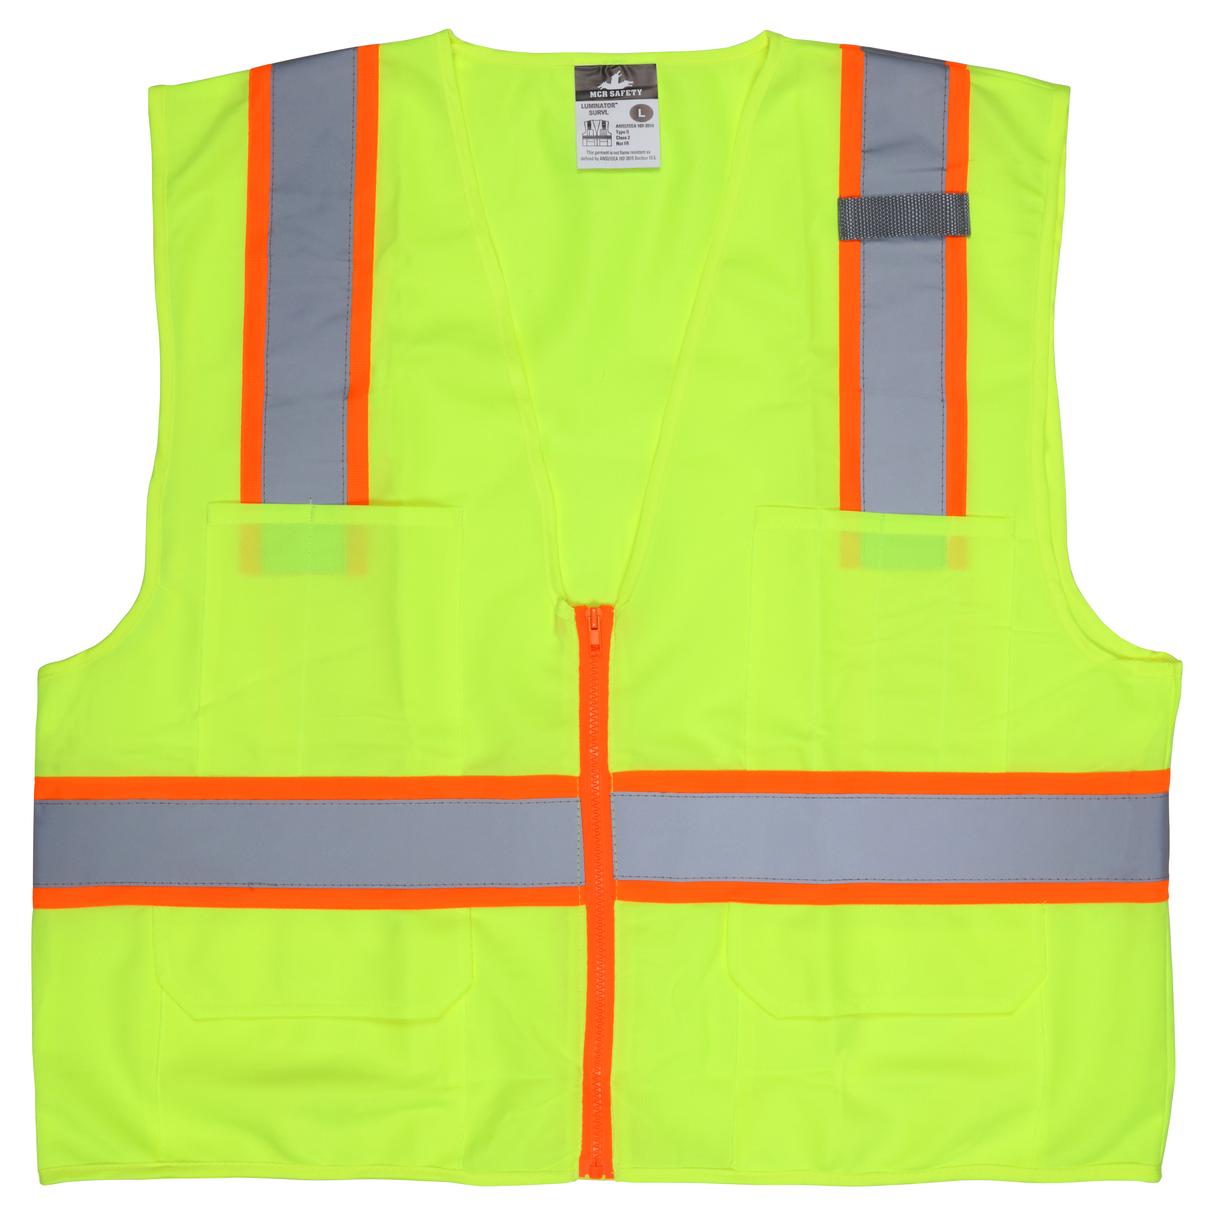 ERB S383P  Lime Safety Vest Class 2 TwoTONE M-5X  ANSI/ISEA APPROVED FREE SHIP 